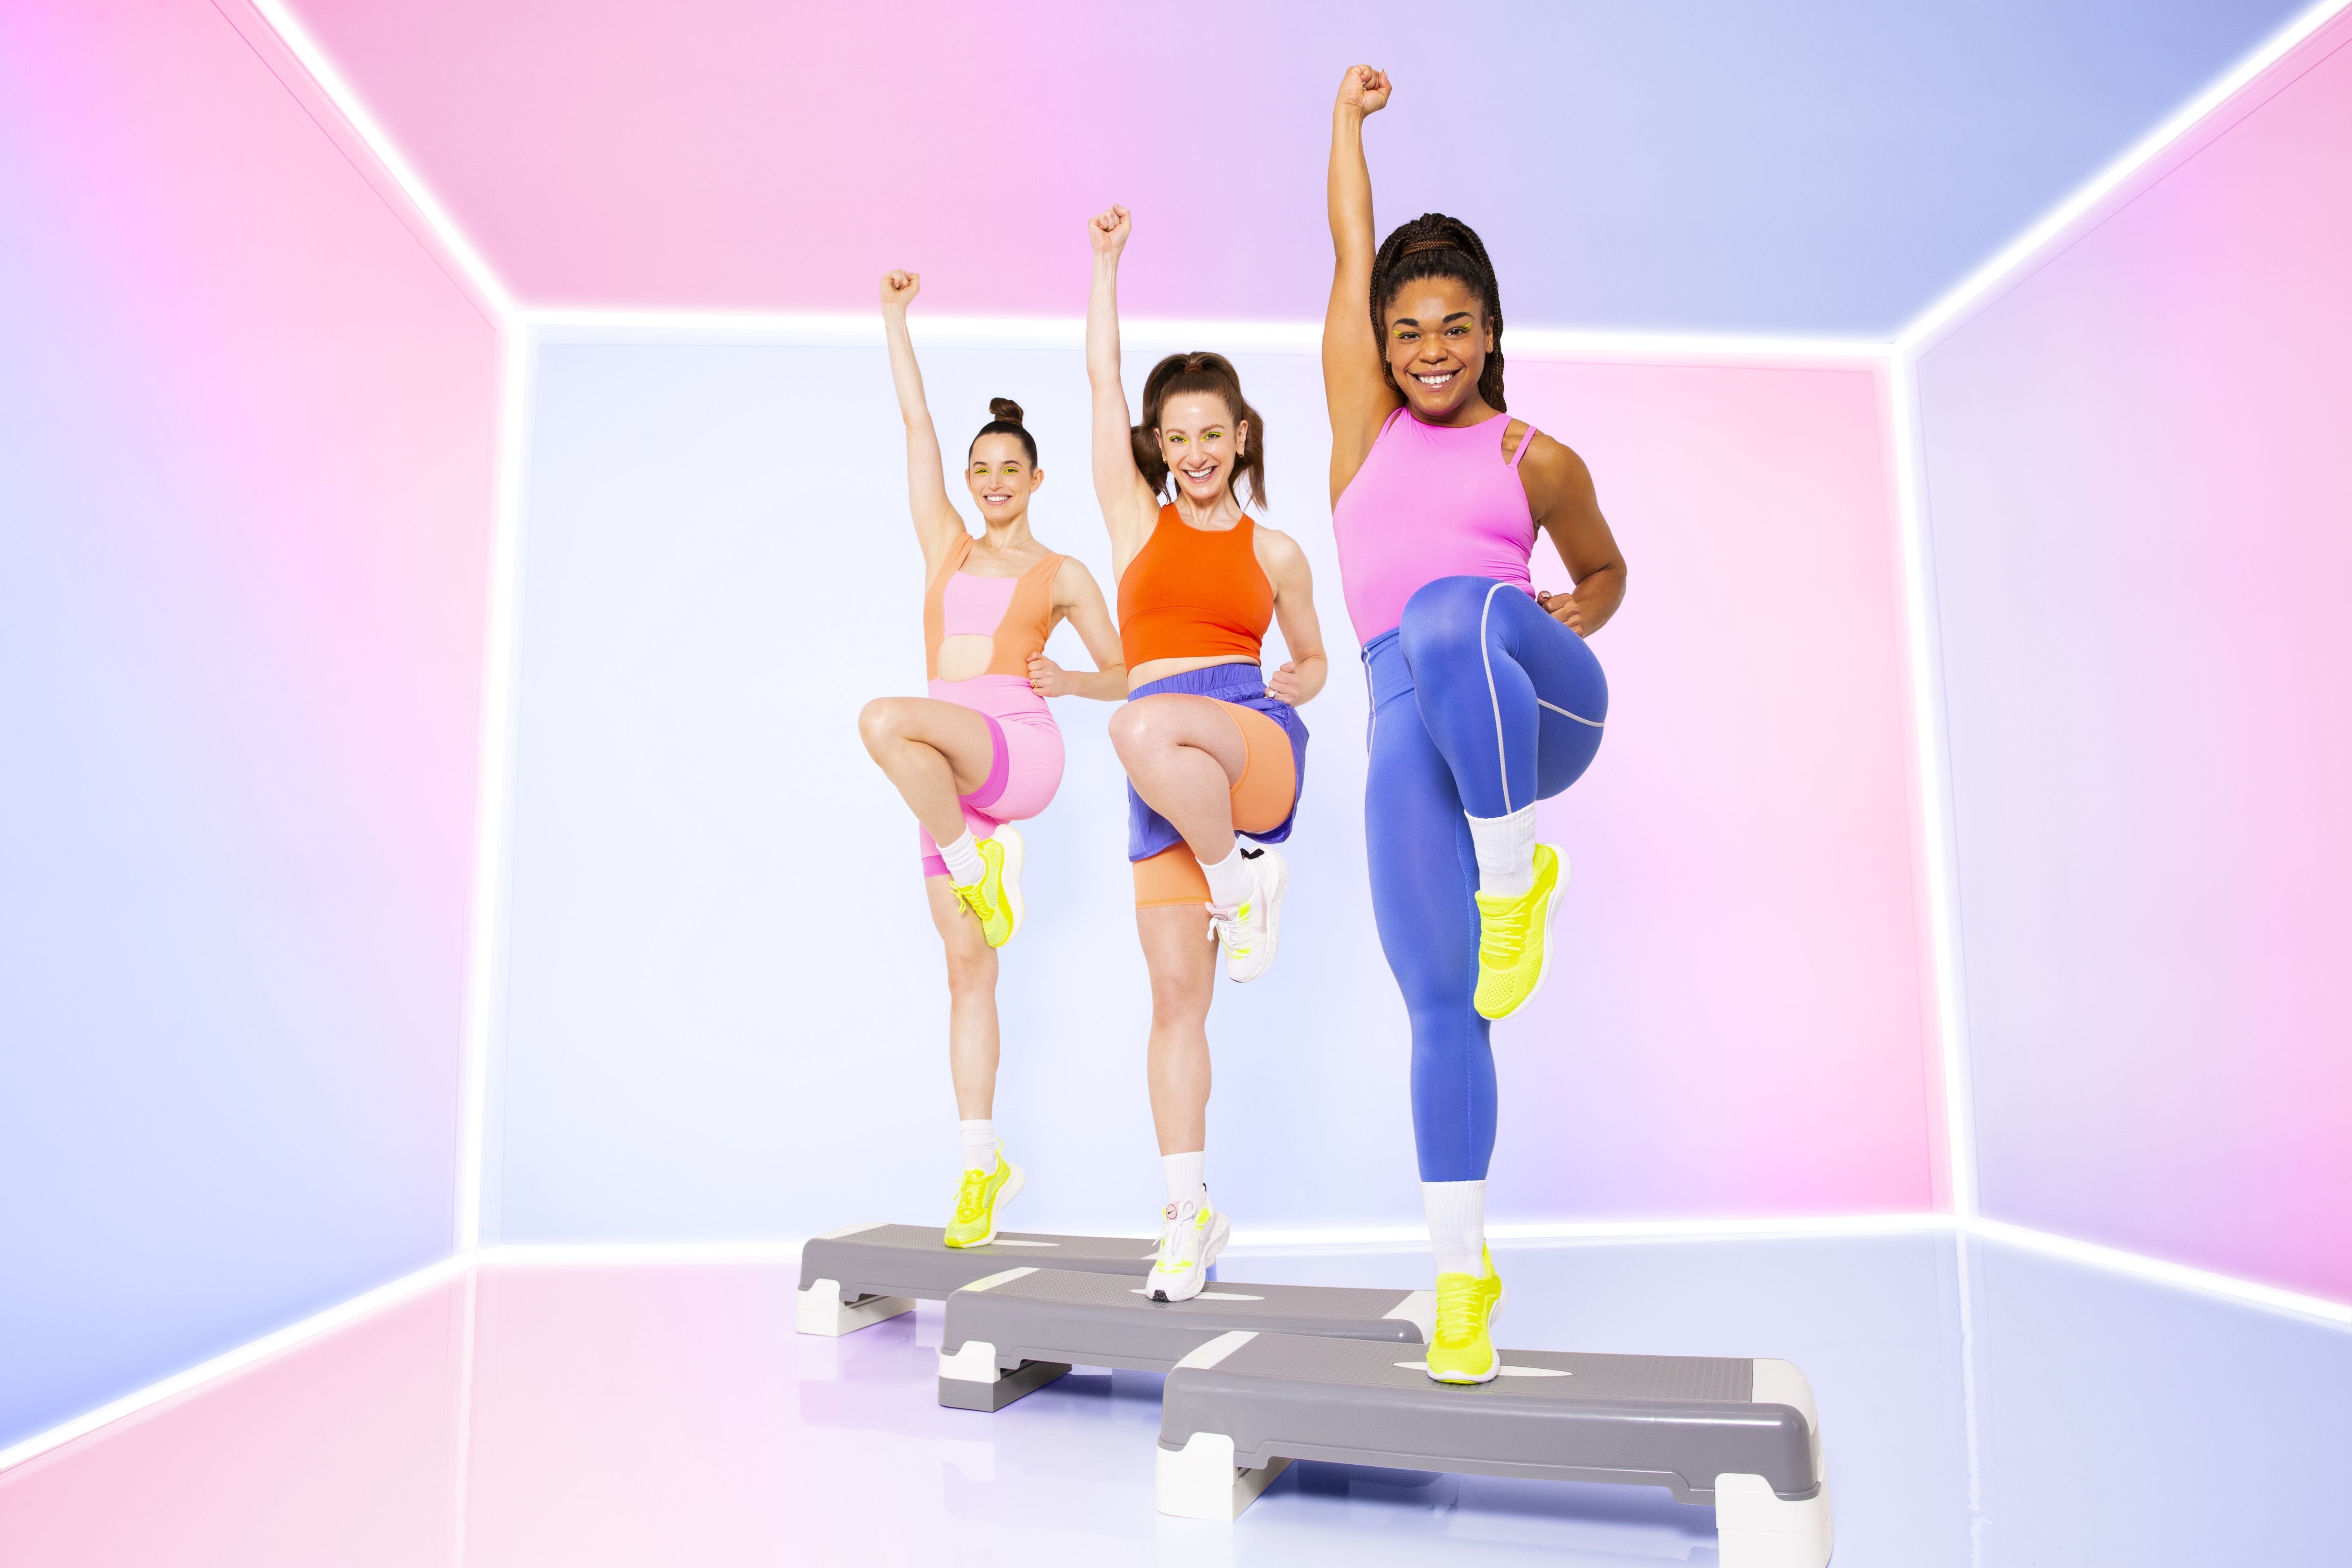 The Best Workout Steps and Aerobic Platforms, According to Customer Reviews